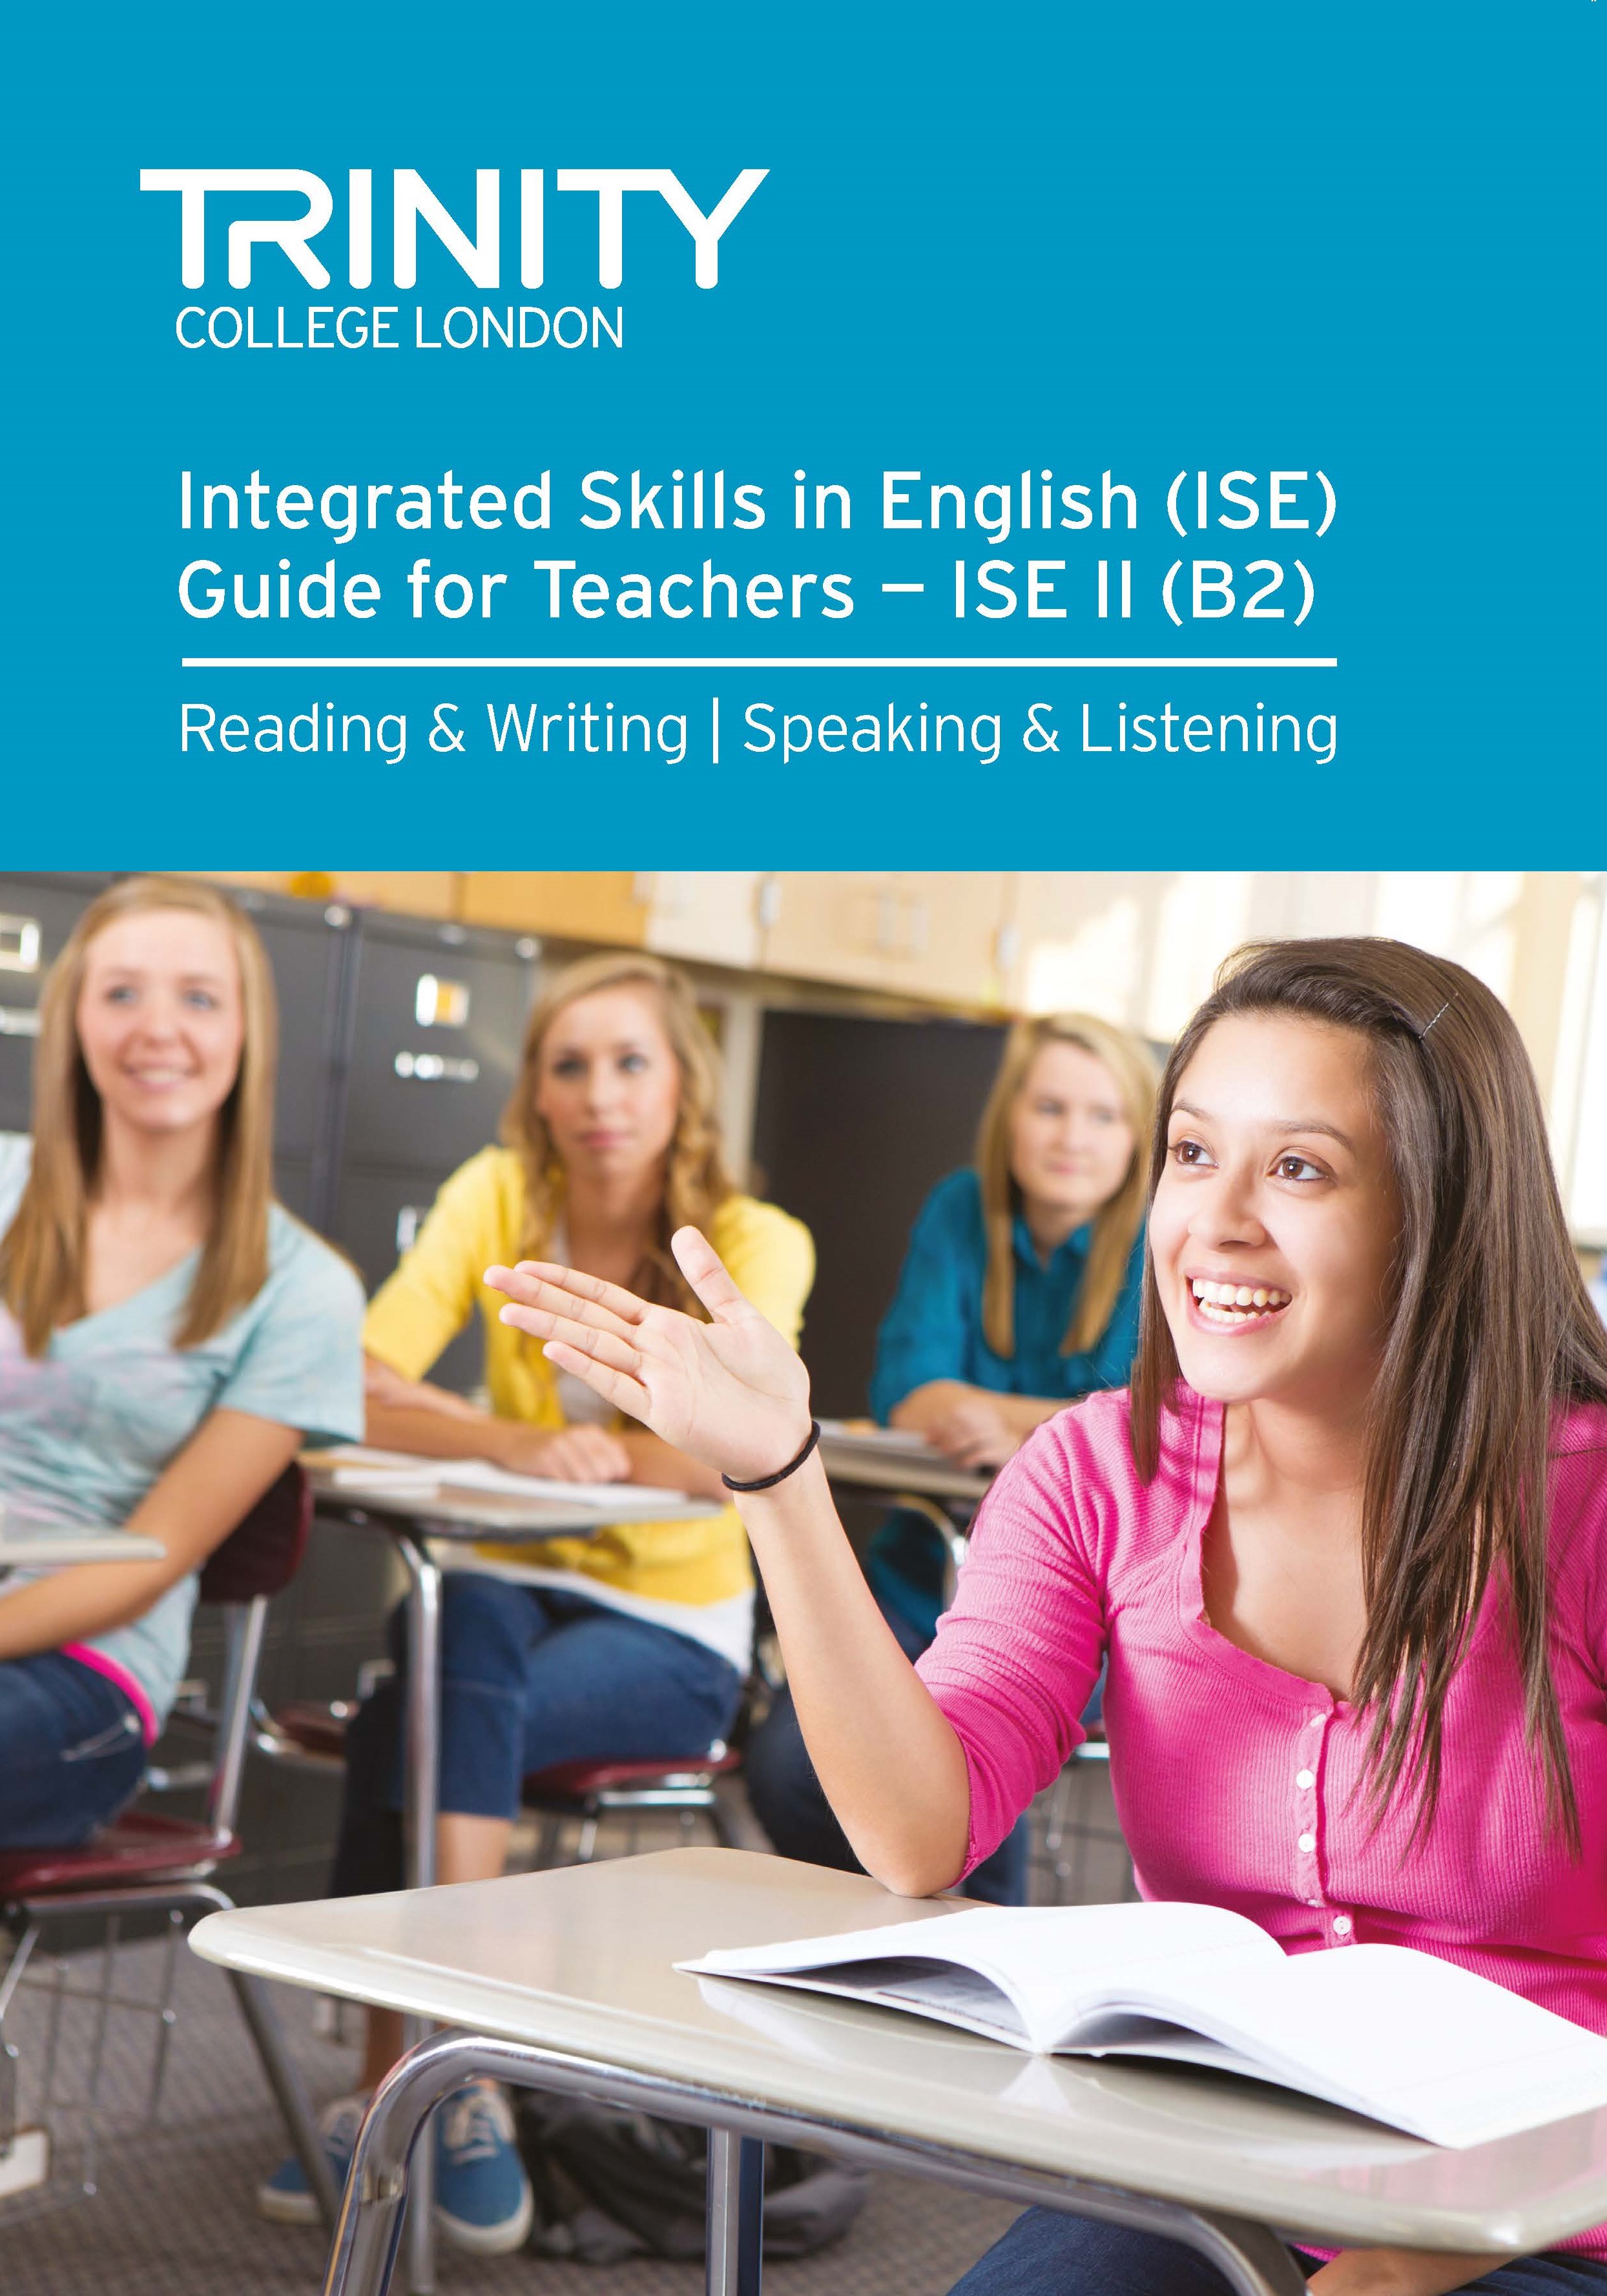 The front cover of the ISE II Guide for Teachers